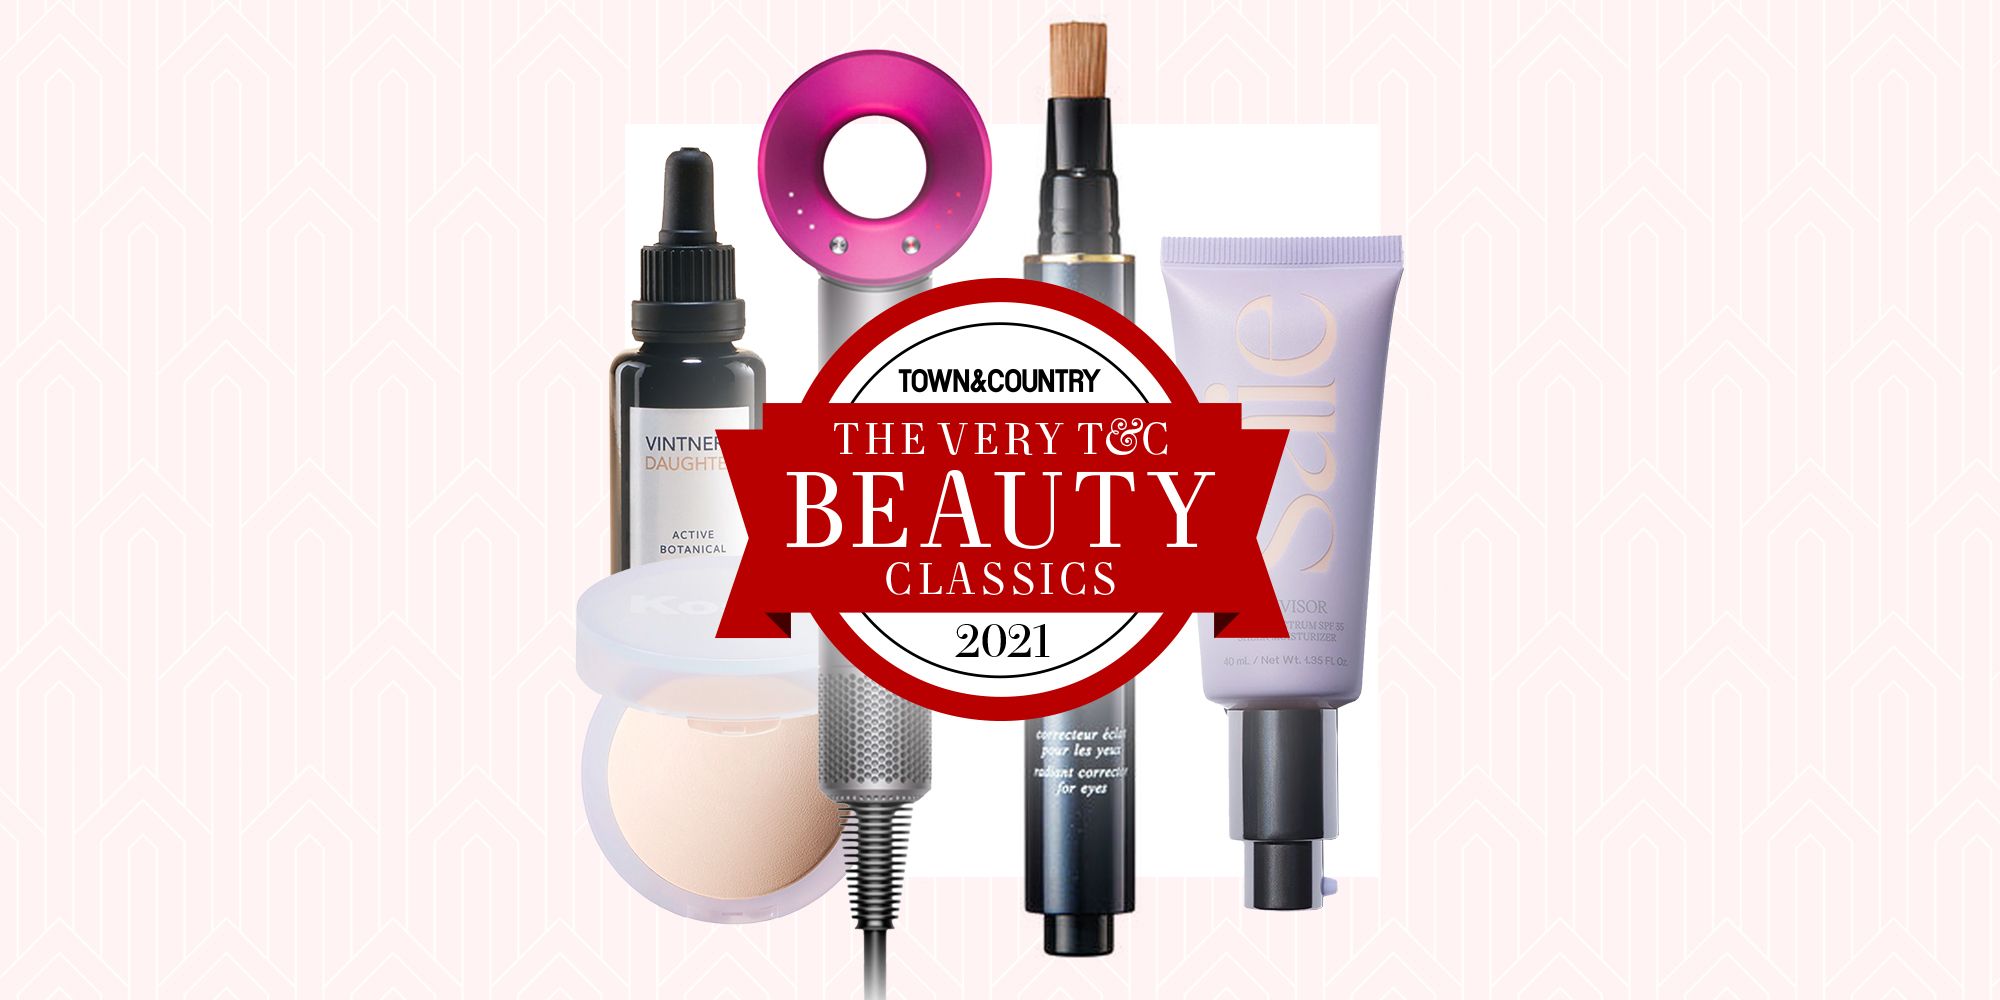 The Very T&C Beauty Classics 2021 - Town and Country Beauty Awards